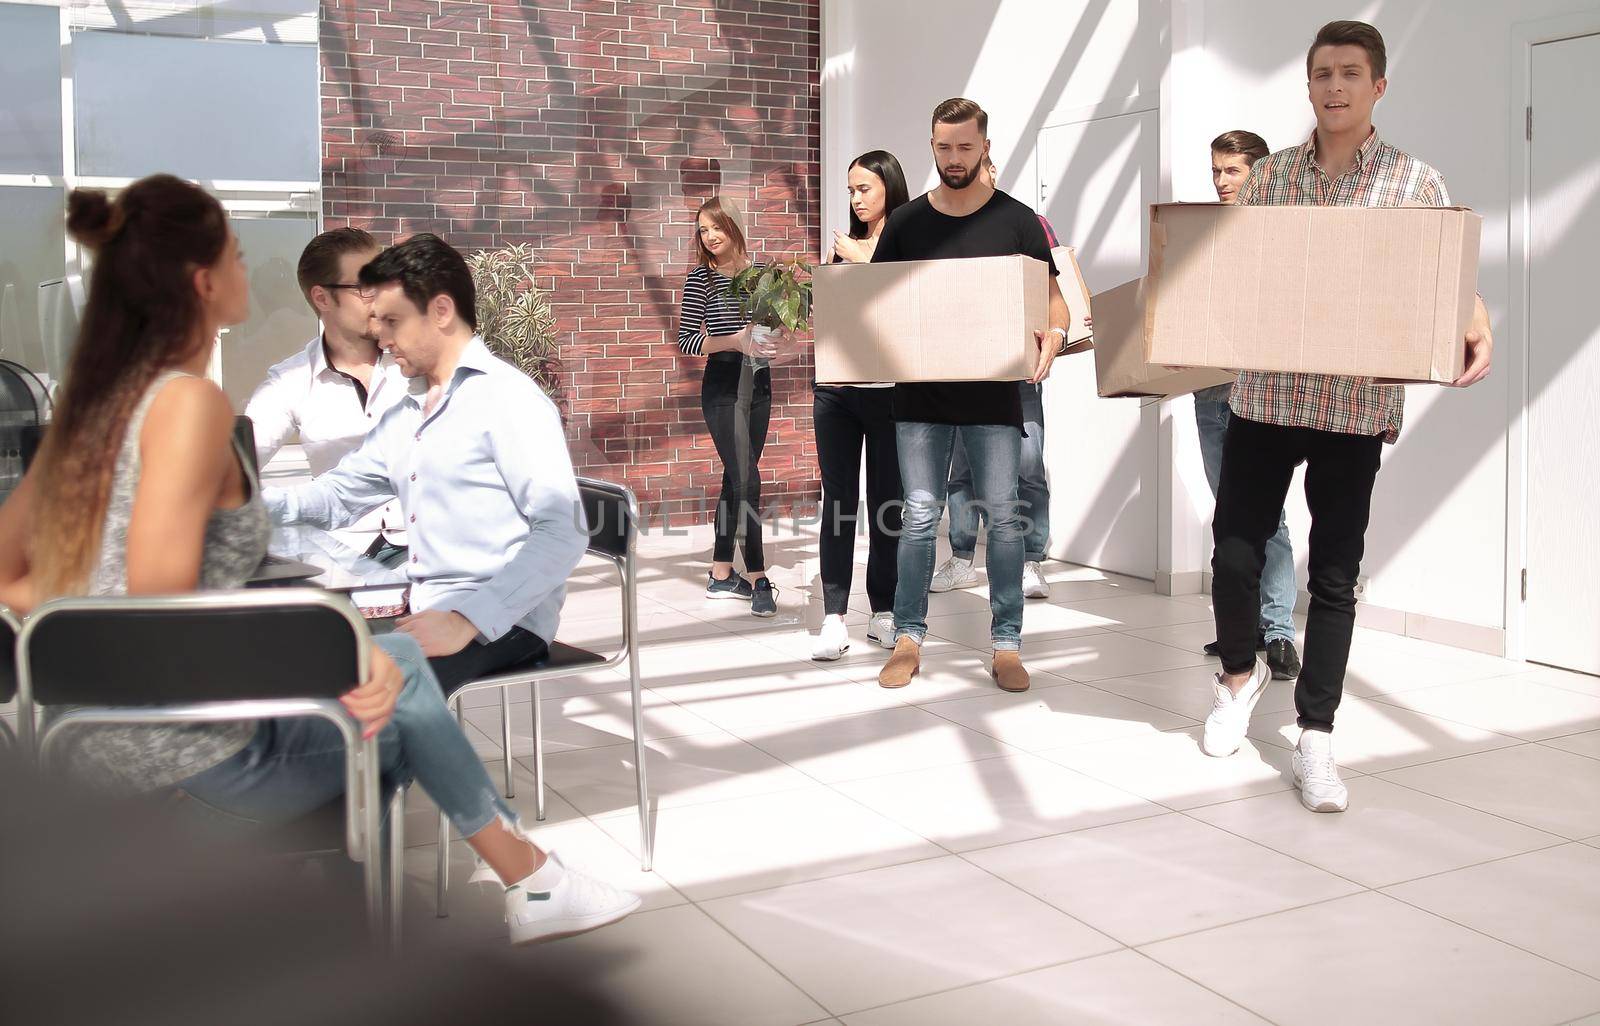 creative business team brings cardboard boxes to the new office.the concept of a startup